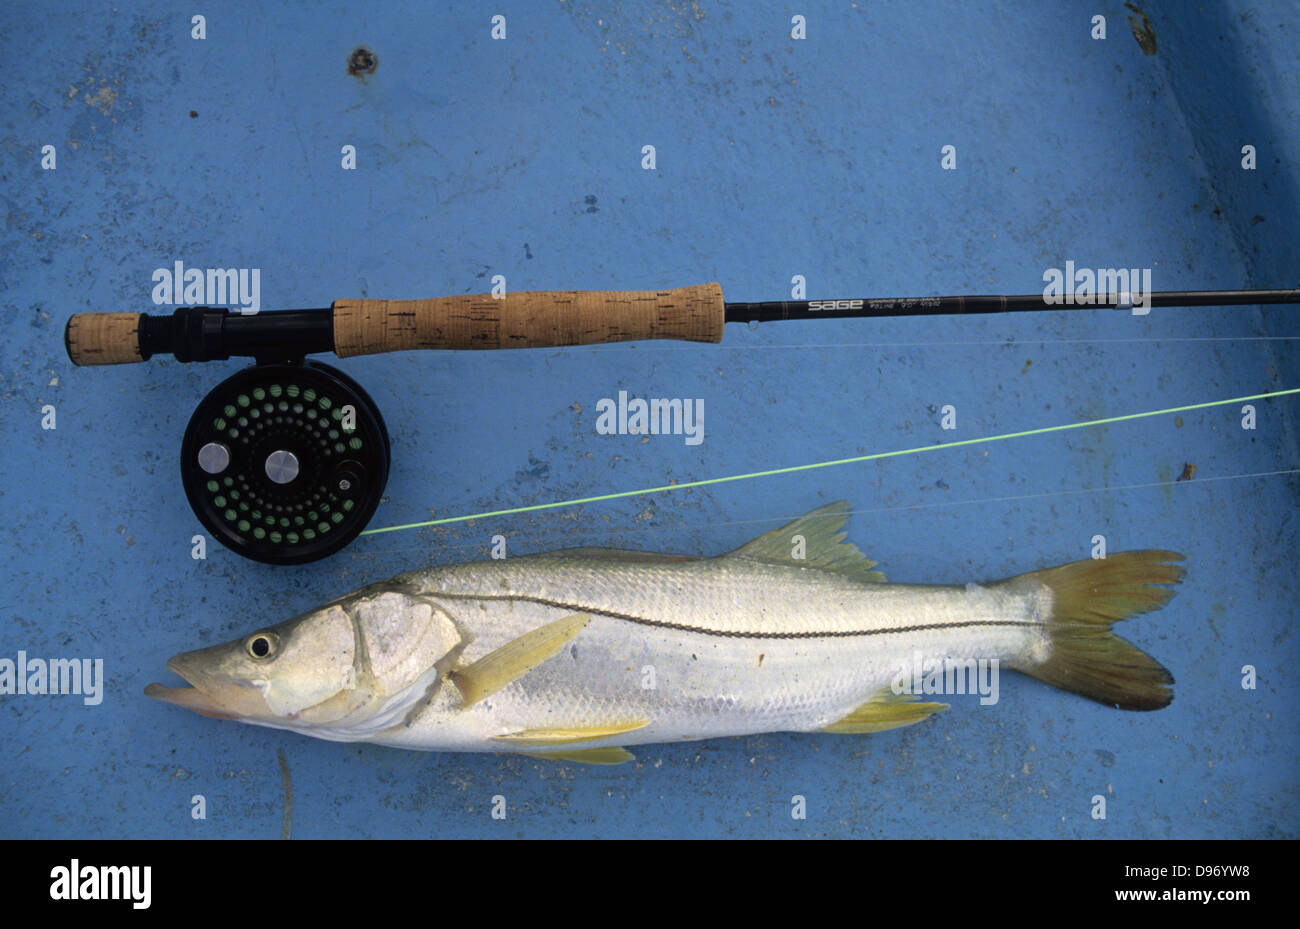 A snook (Centropomus undecimalis) caught while fishing near Cancun Mexico Stock Photo